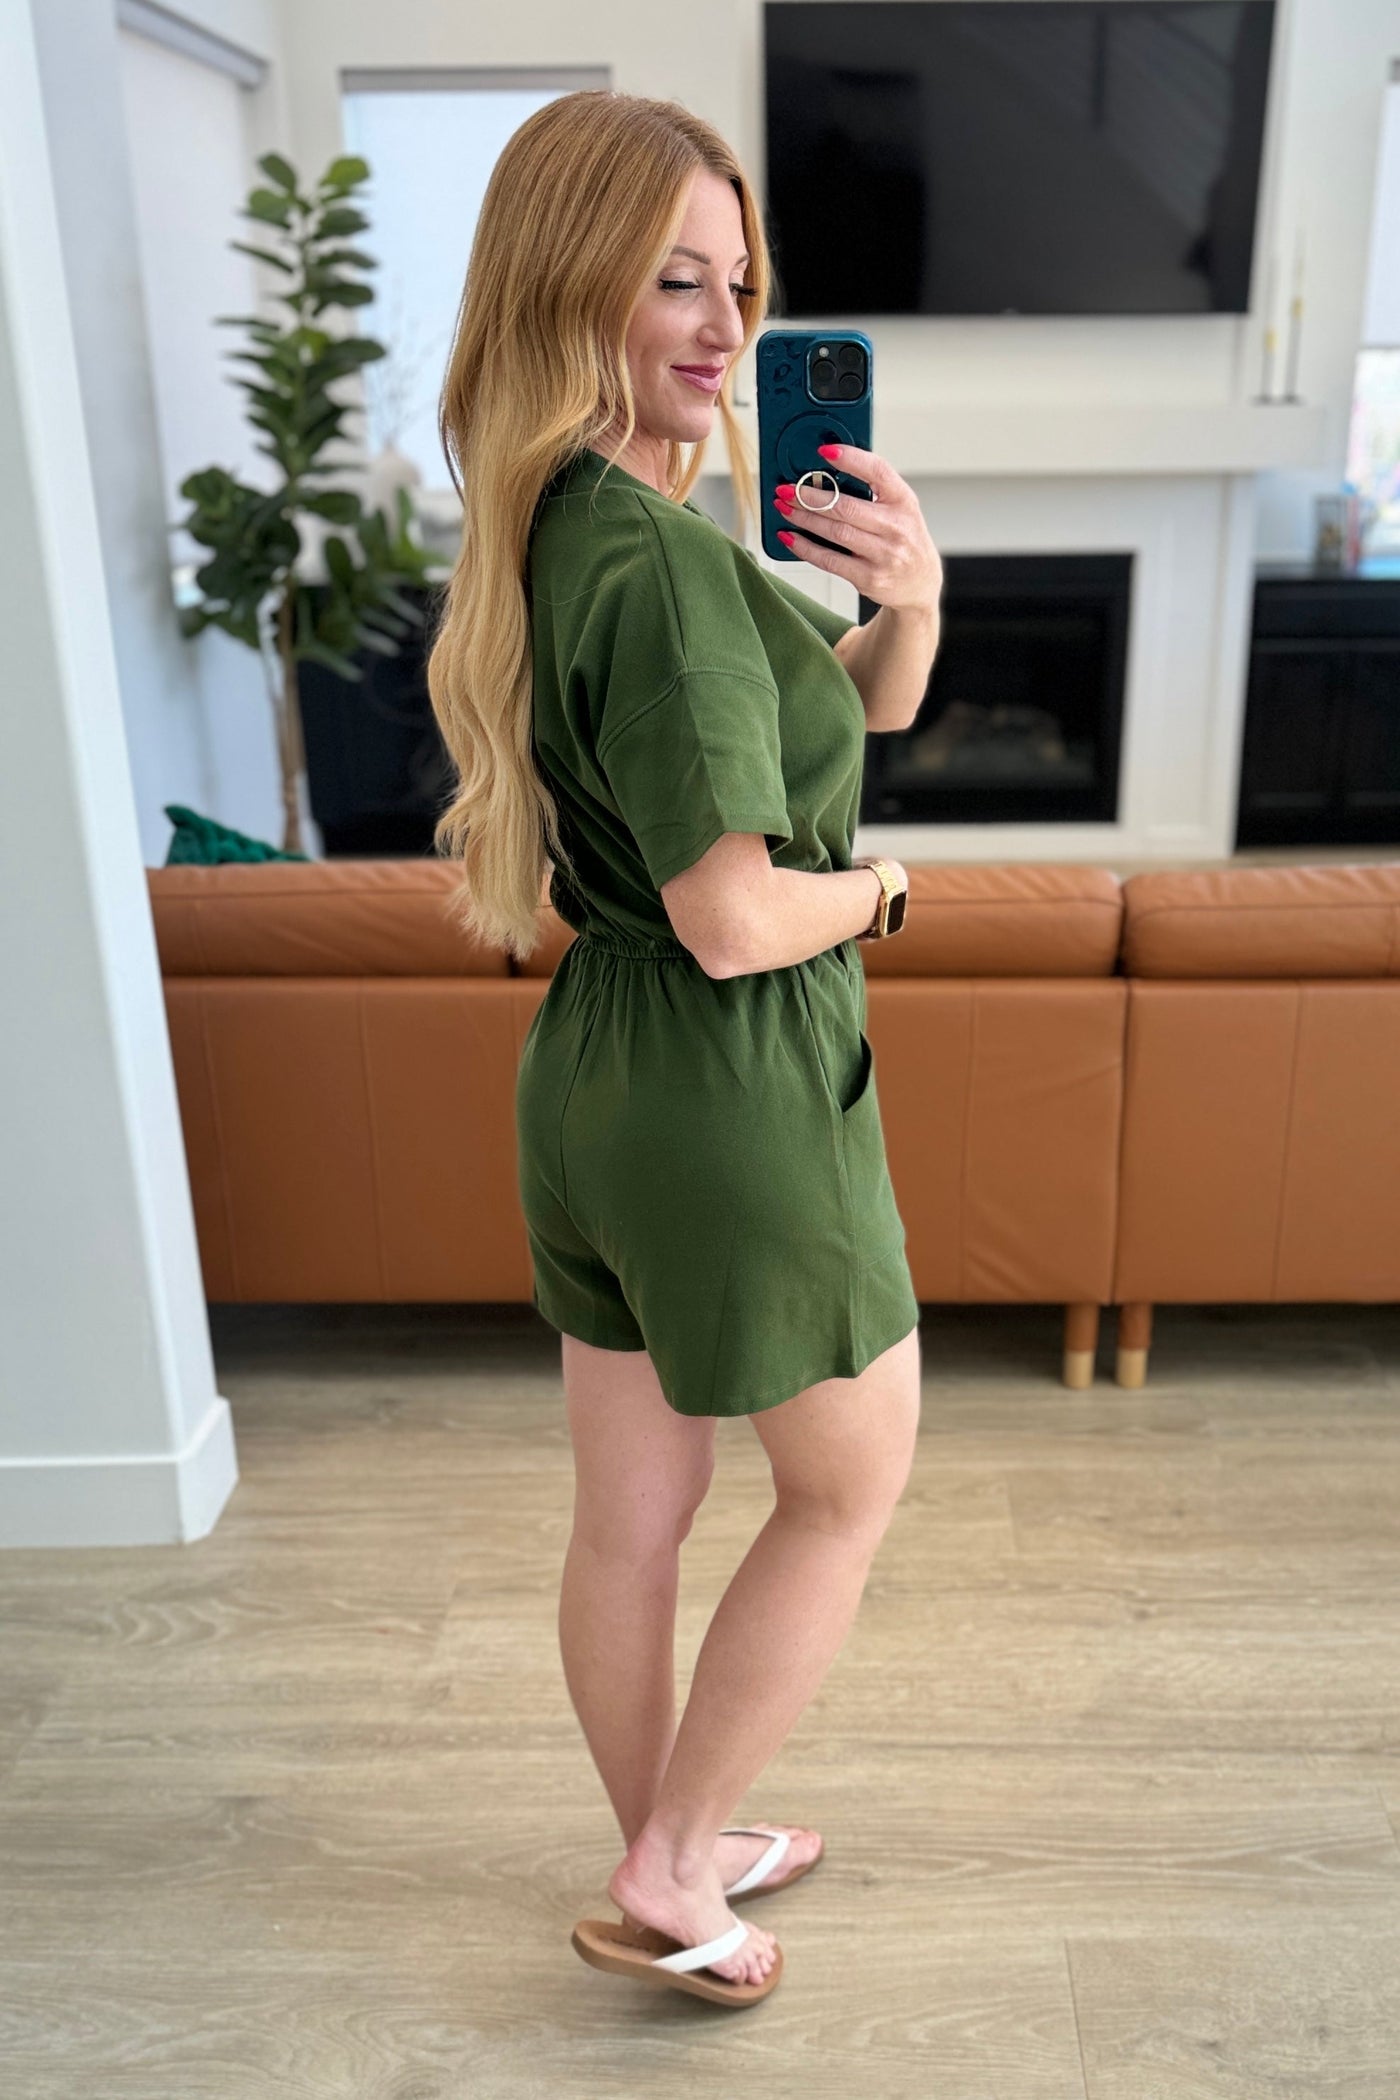 Short Sleeve V-Neck Romper in Army Green-Jumpsuits & Rompers-Ave Shops-Market Street Nest, Fashionable Clothing, Shoes and Home Décor Located in Mabank, TX